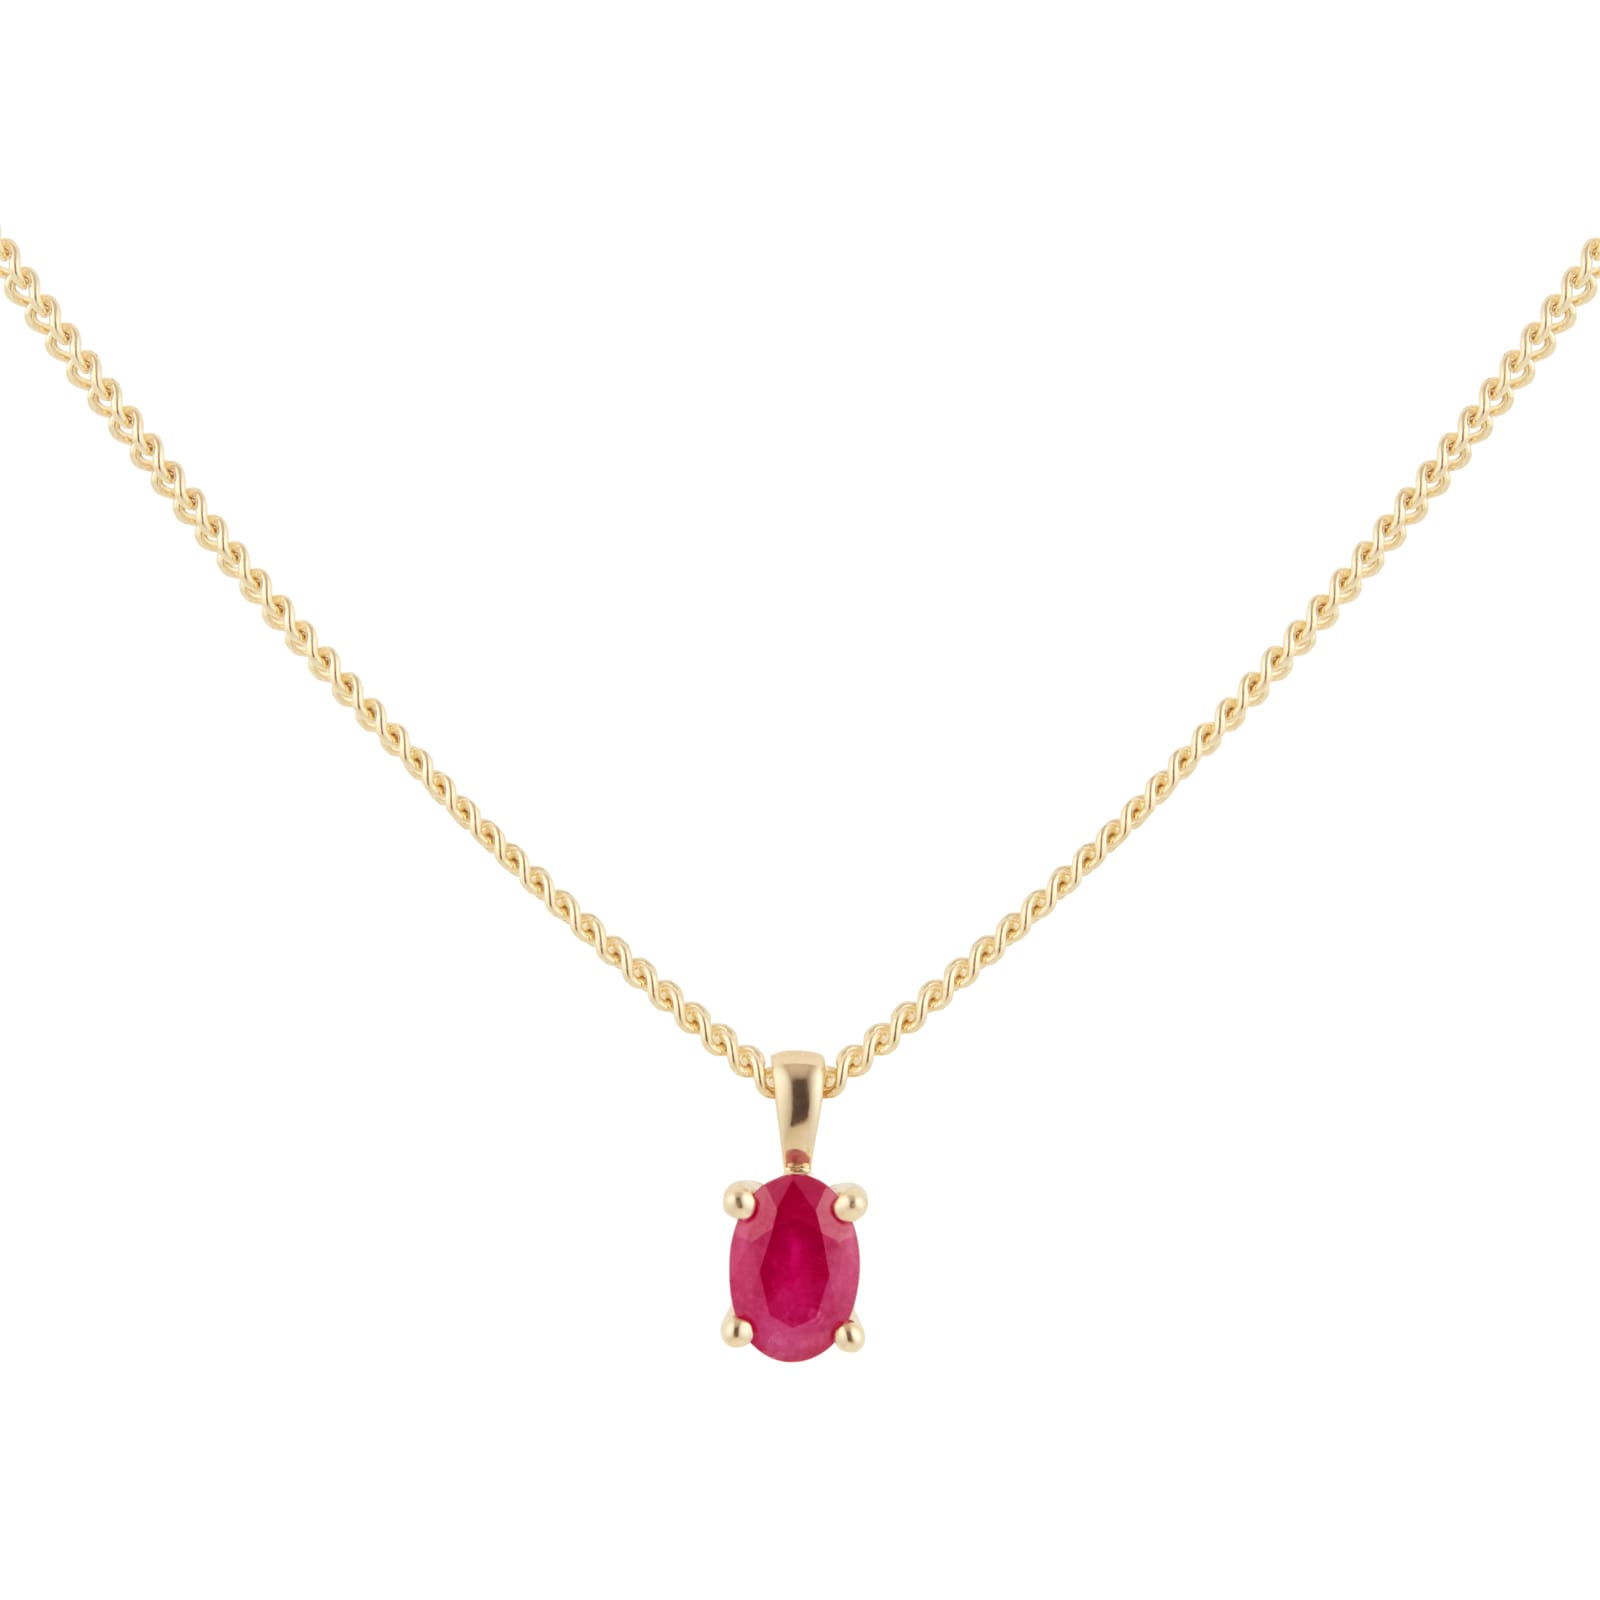 9ct Yellow Gold 4 Claw Oval Cut Ruby Pendant & Chain